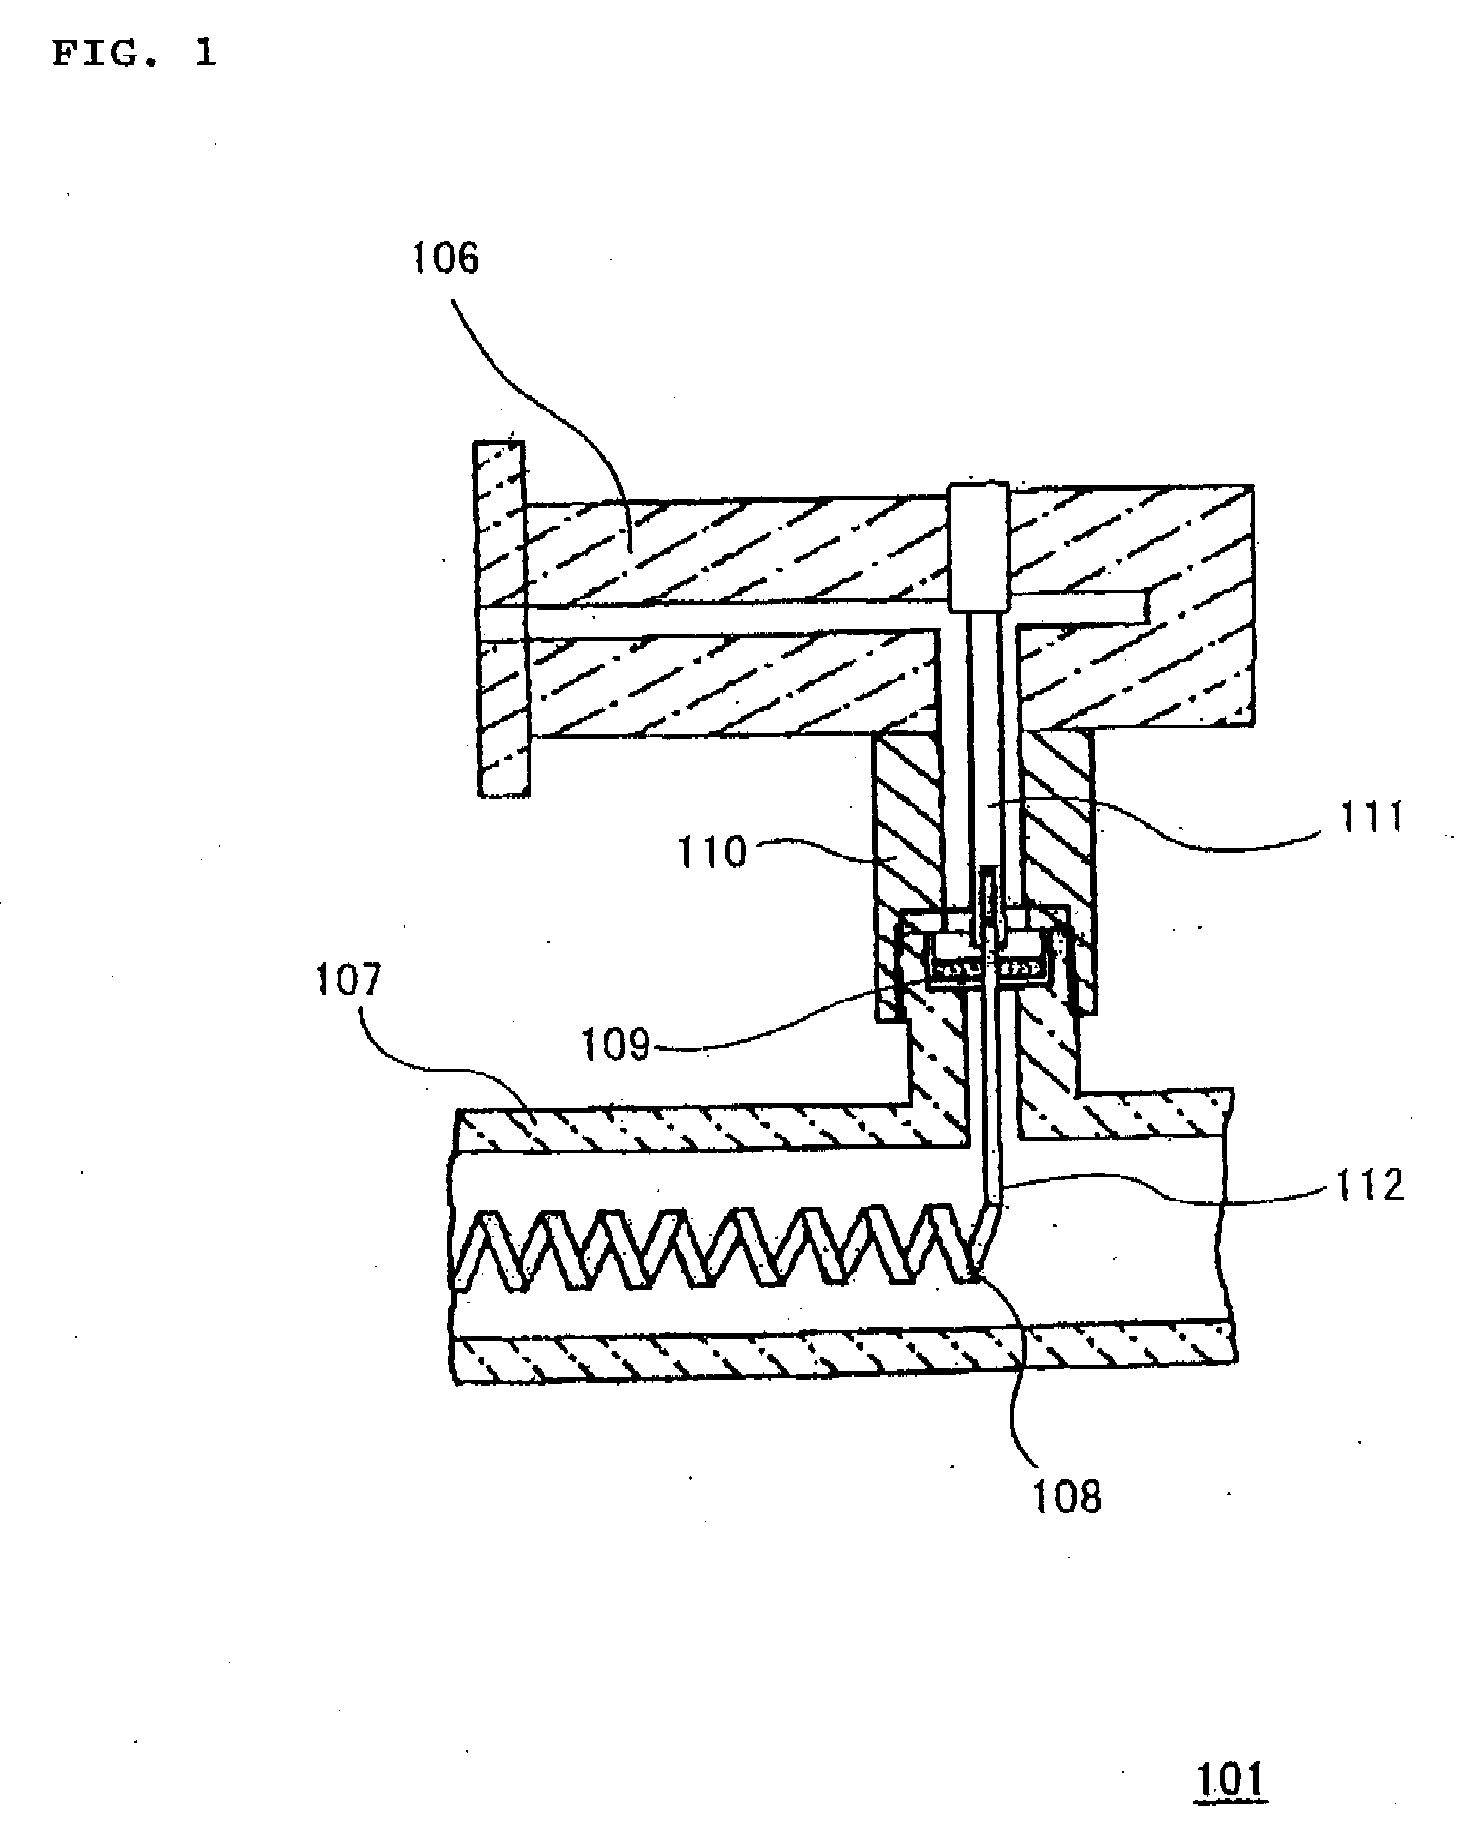 Structure of coaxial-to-waveguide transition and traveling wave tube